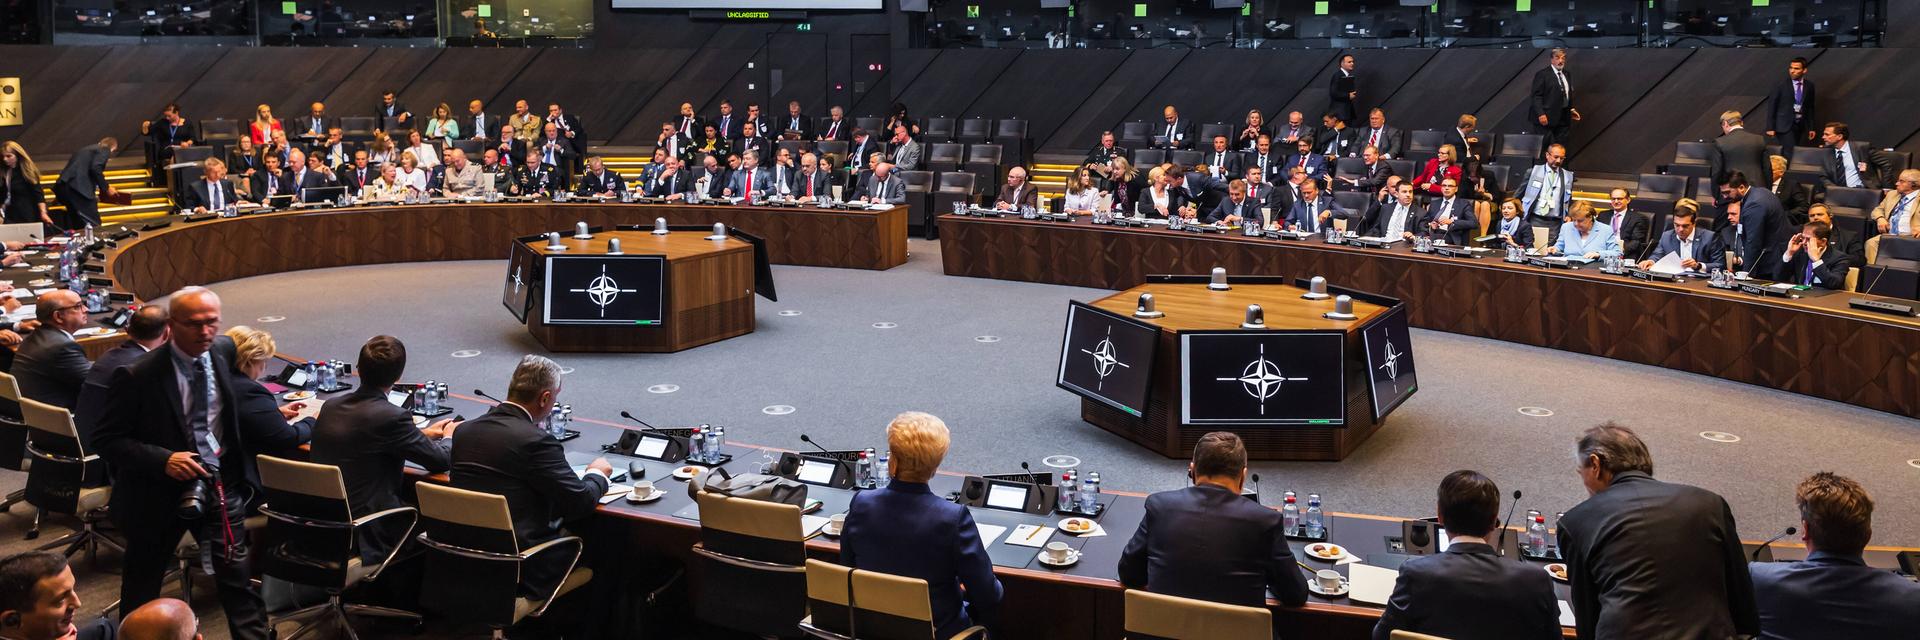 RECORD DATE NOT STATED BRUSSELS, BELGIUM - Jul 12, 2018: NATO military alliance summit. World leaders during a meeting of the North Atlantic Treaty Organization summit in Brussels , 35731560.jpg, alliance, atlantic, backstage, belgium, brussels, center, communication, conference, conversation, delegation, discussion, equipment, europe, european, event, group, headquarters, meeting, members, military, monitors, nato, negotiations, news, north, office, official, organization, participants, peace, people, policy, politics, safety, security, summit, talk, treaty, union, visit, work